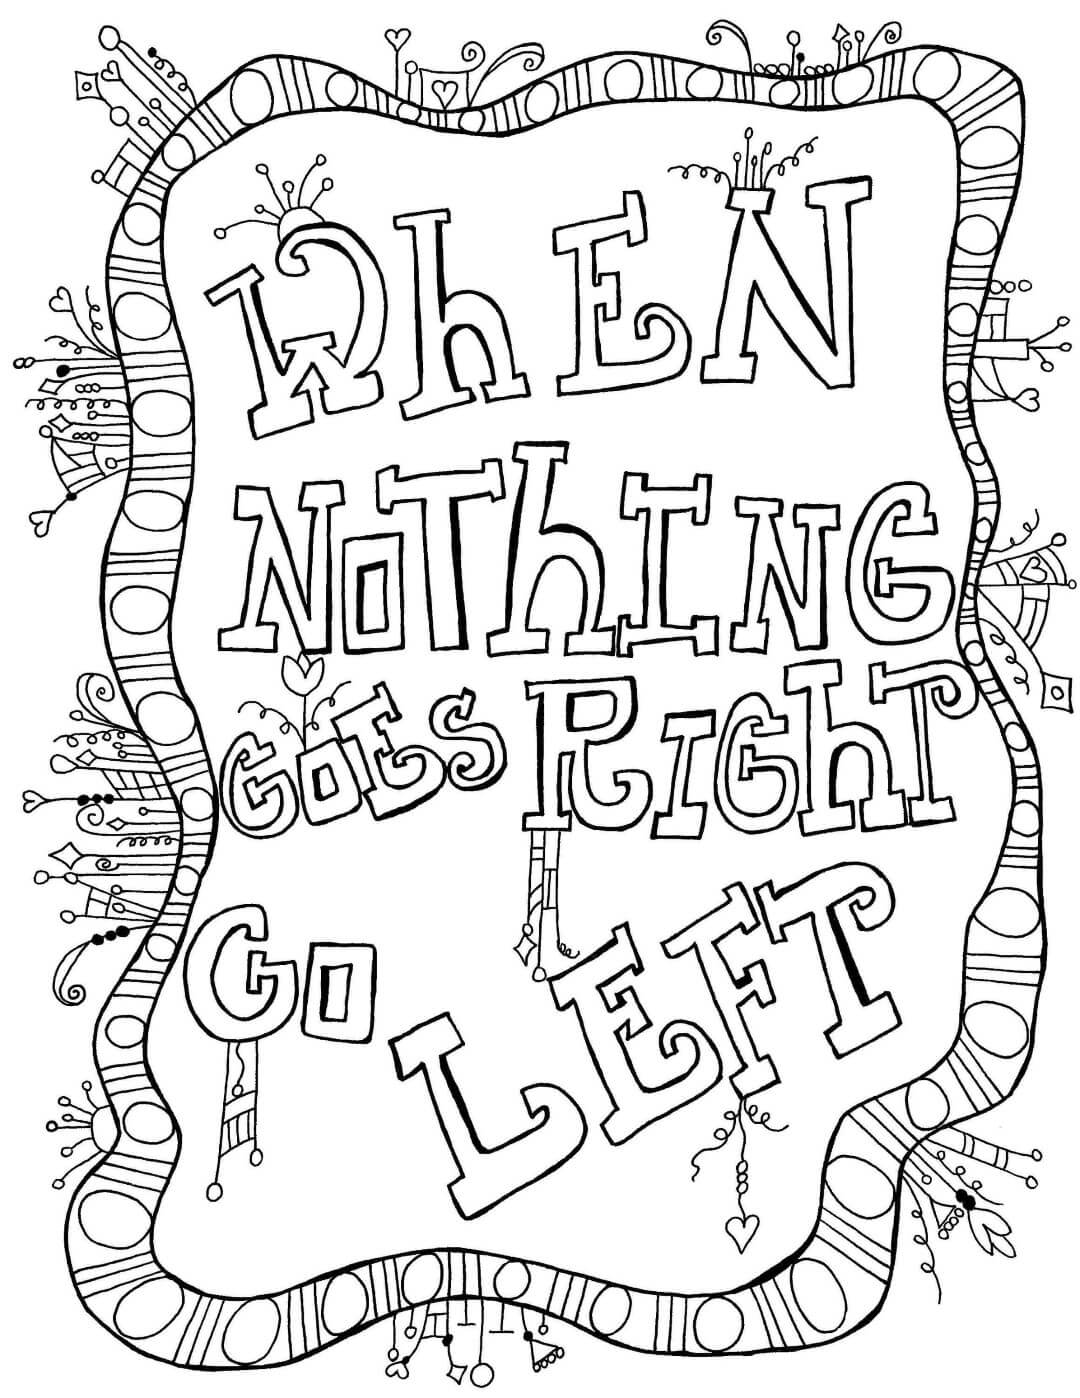 Inspirational Quotes Coloring Page